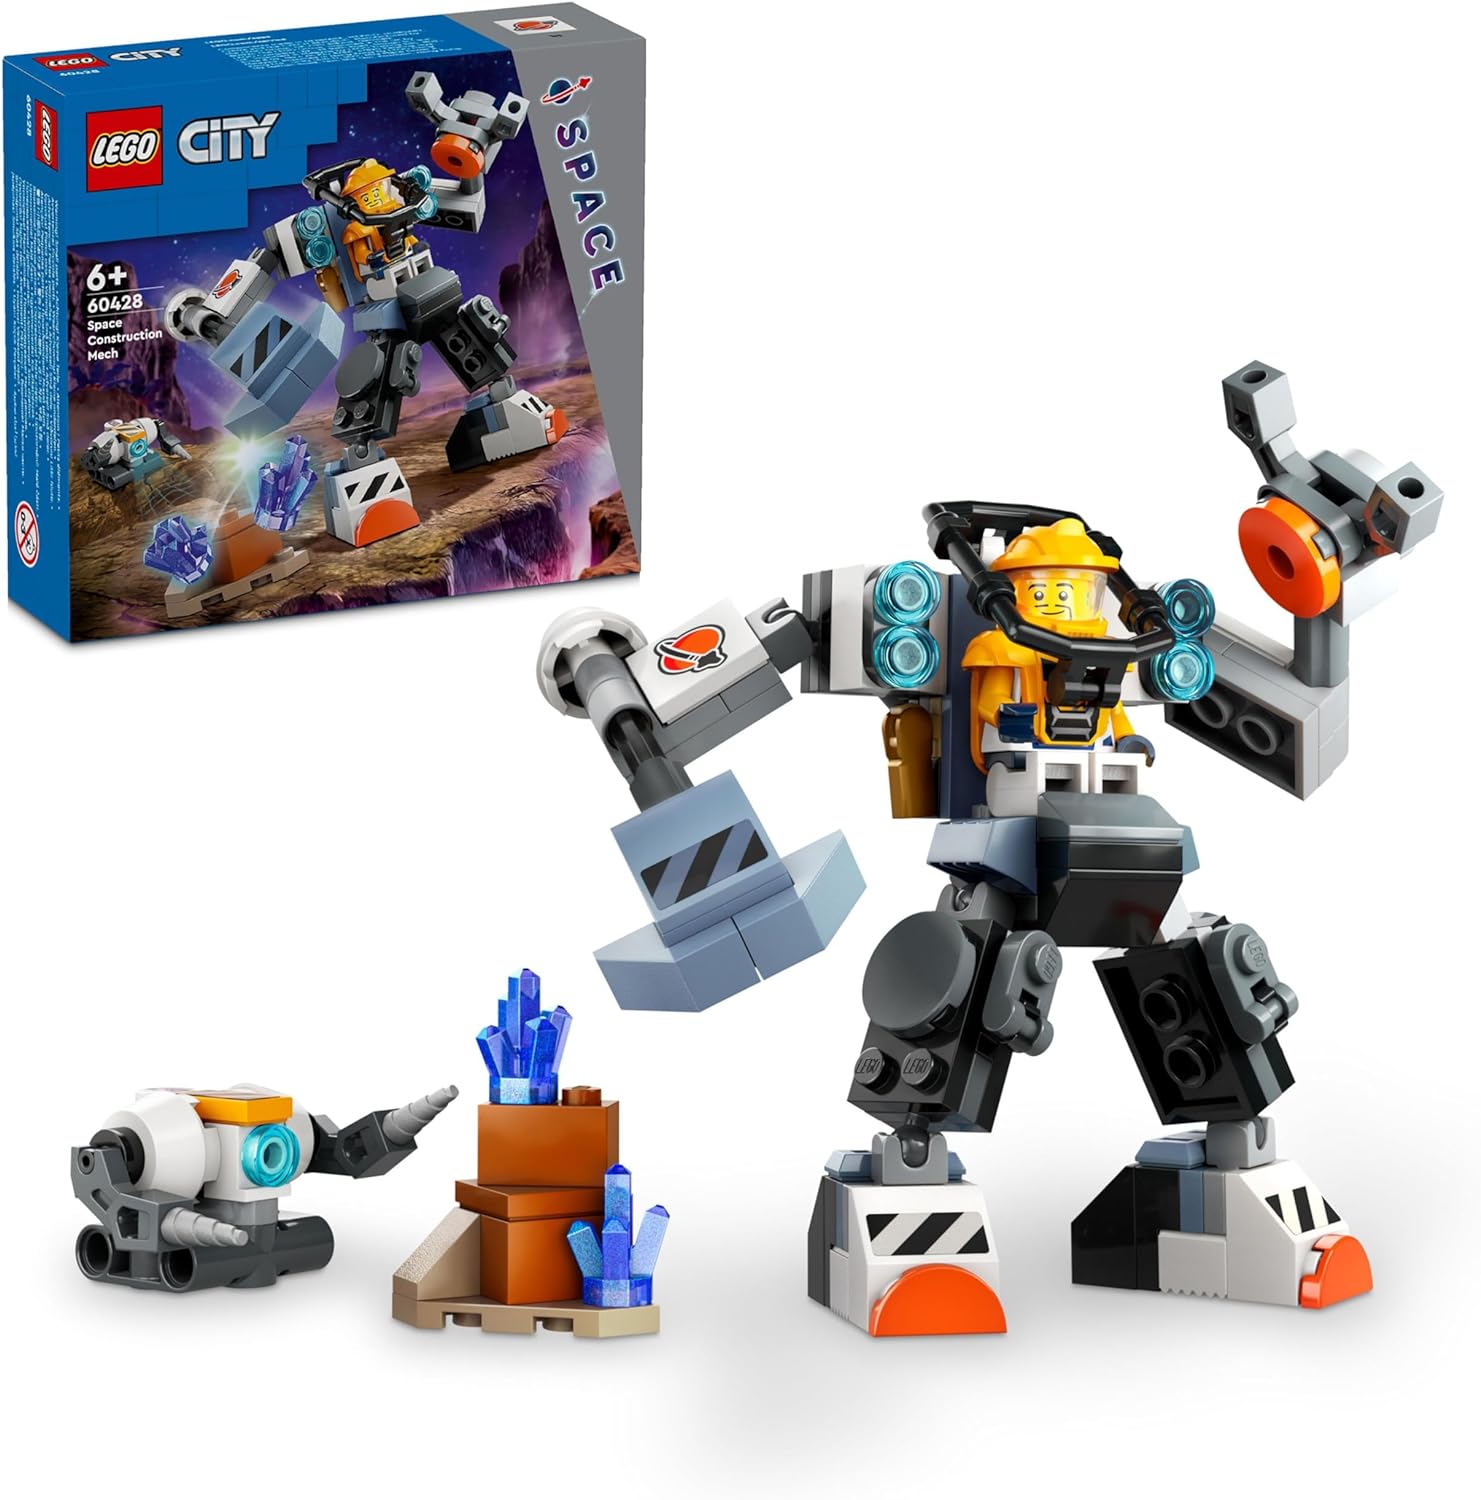 LEGO City Space Mech, Robot Construction Kit for Children from 6 Years, Set with Action Figure Toy and Pilot Figure, Gift for Boys and Girls 60428